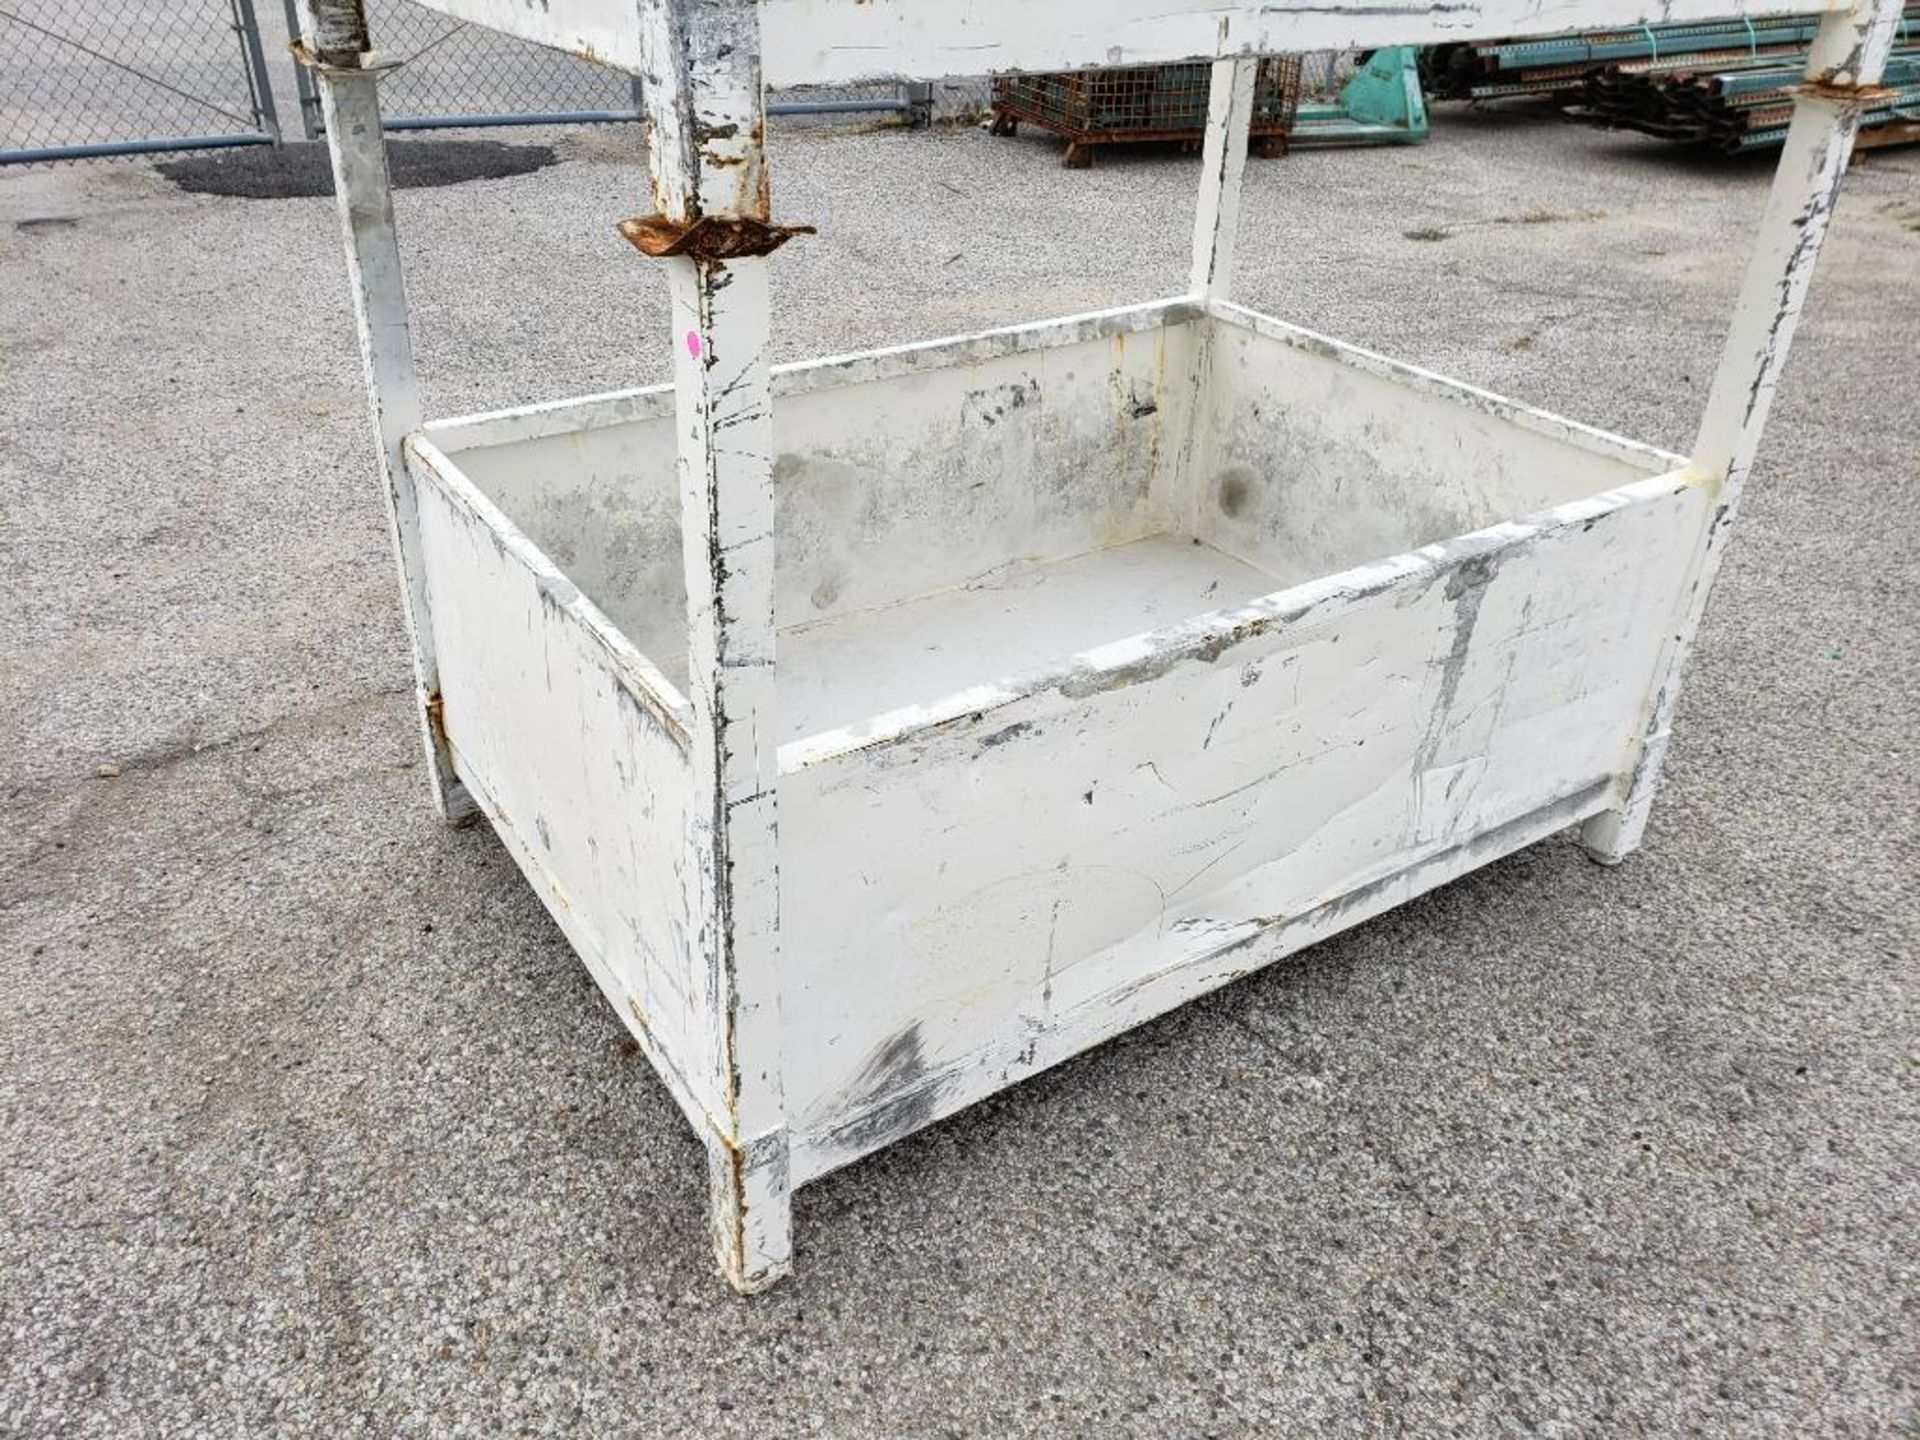 Qty 2 - Steel stackable containers. 60in x 41in x 21in container. 44in with legs. - Image 2 of 5